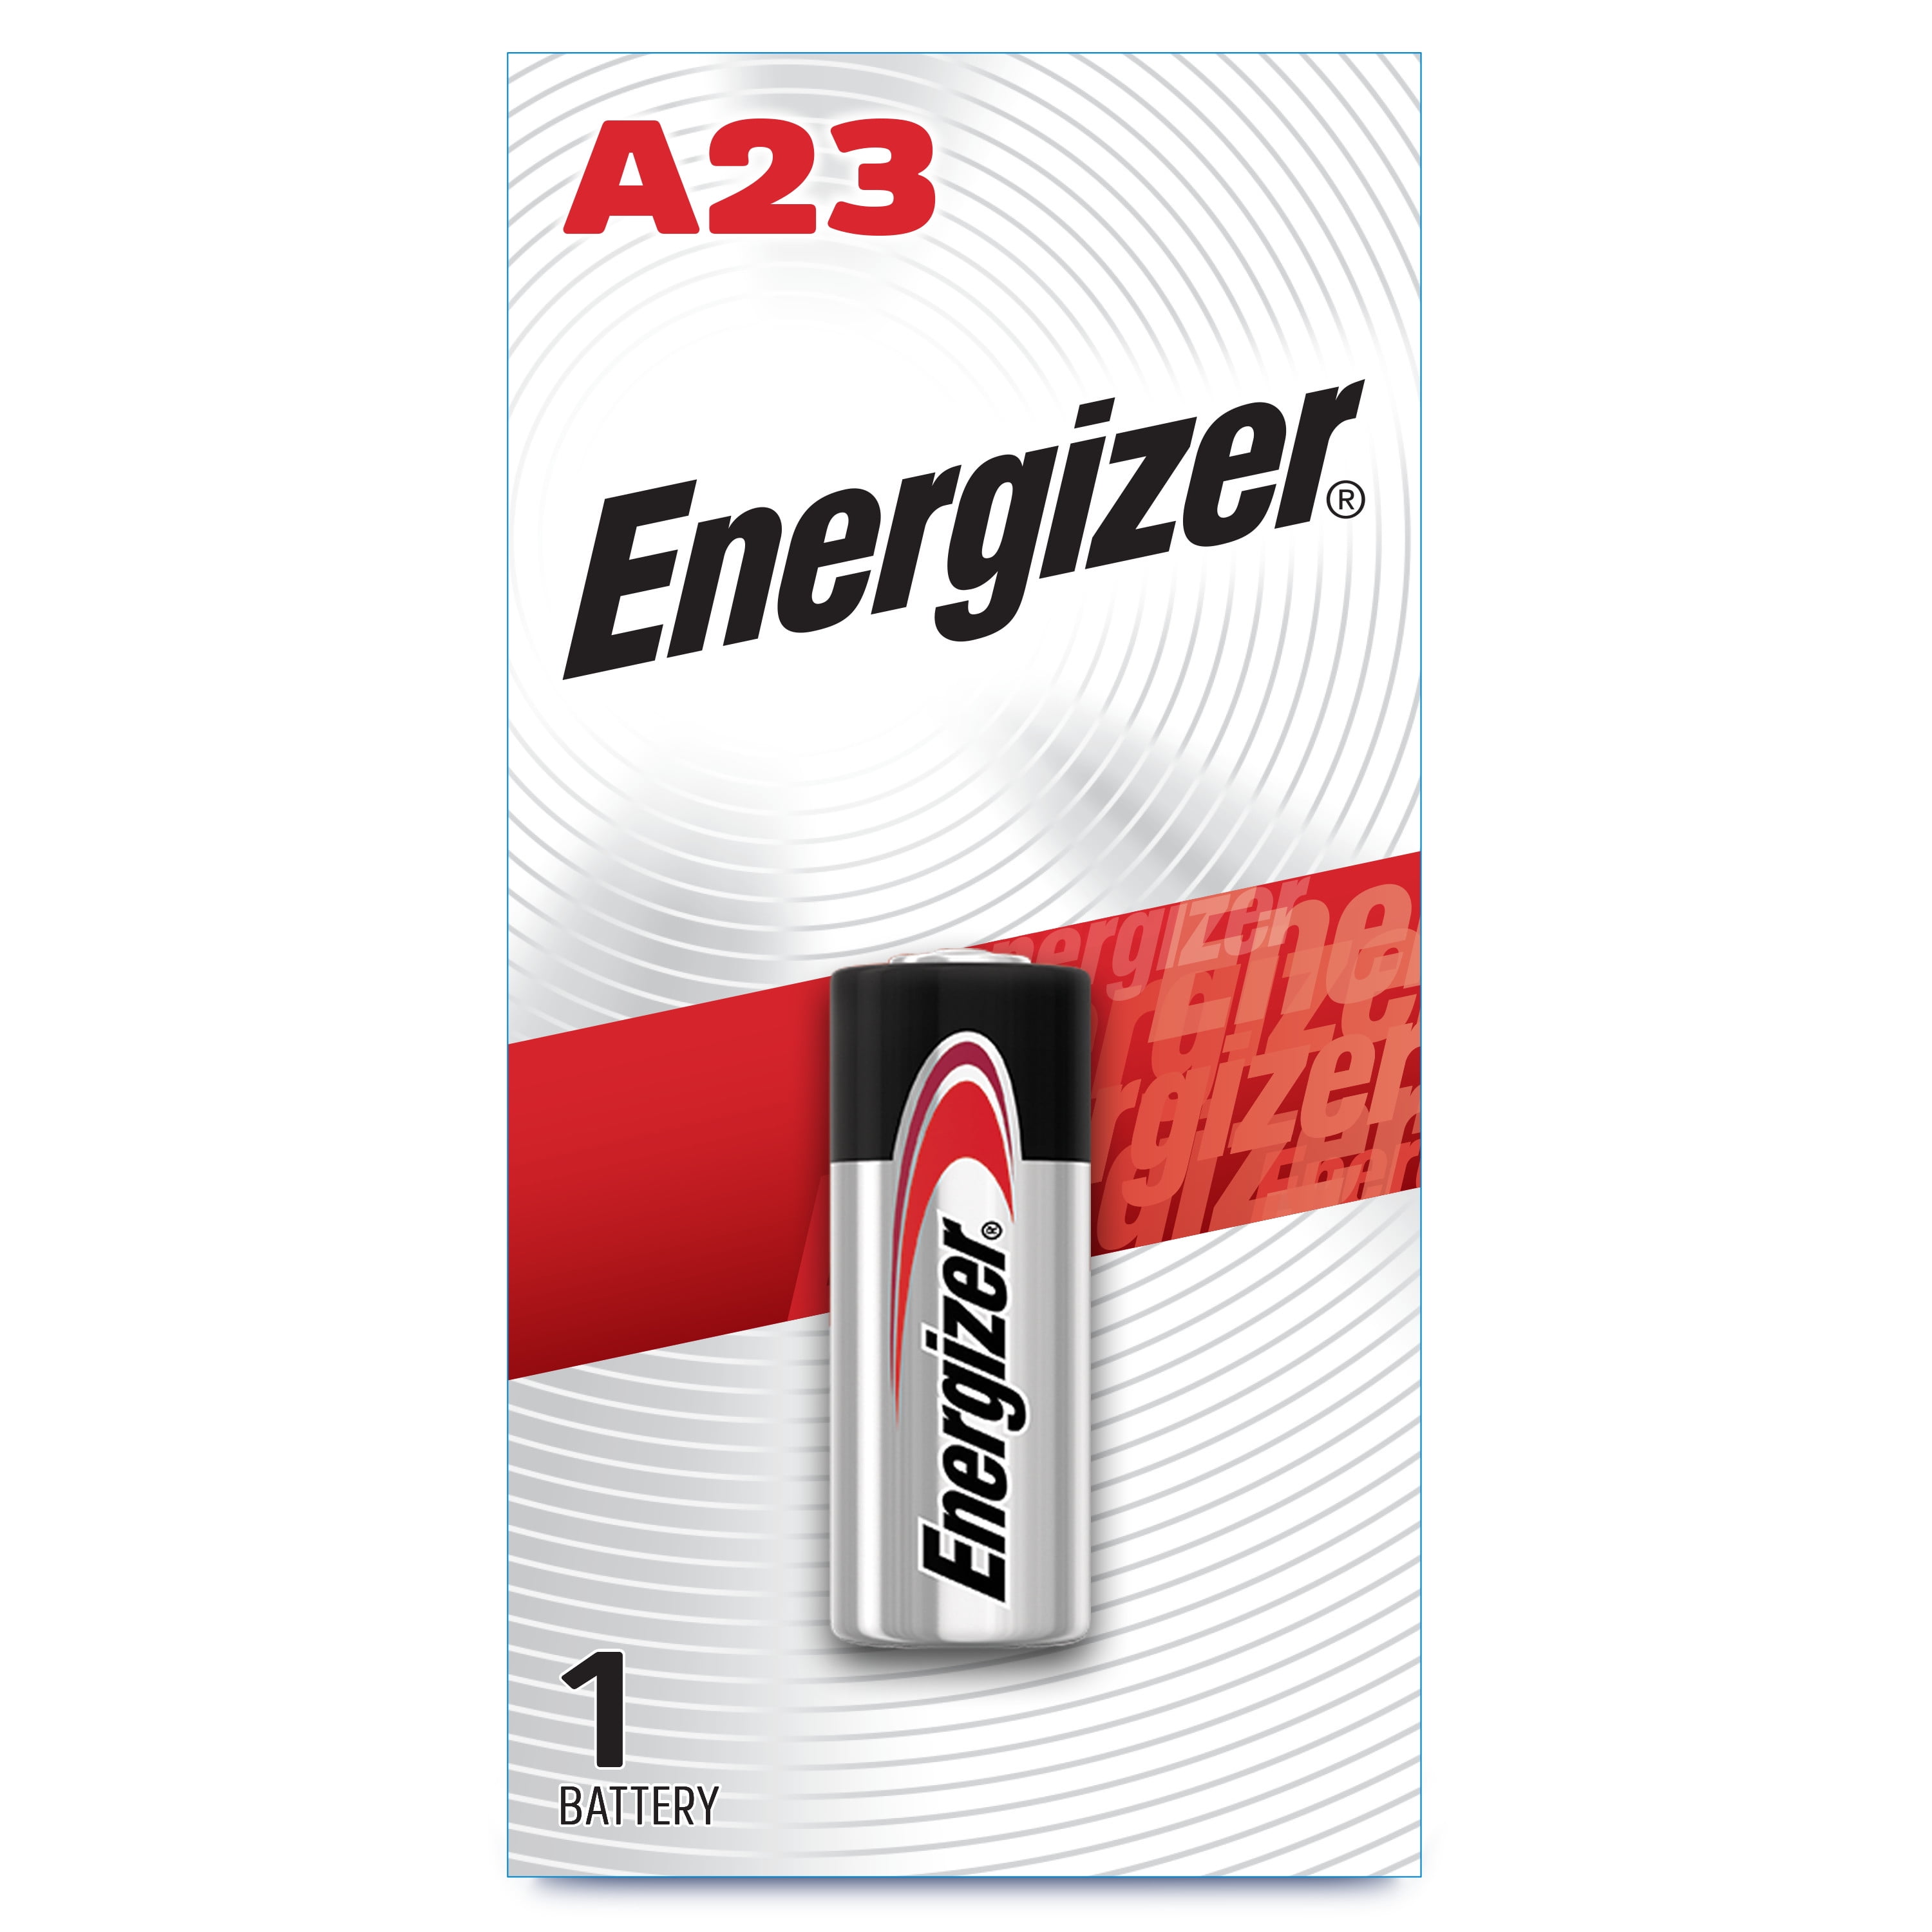 Energizer A23 Alkaline 12 Volt Battery 50 Pack + FREE SHIPPING!